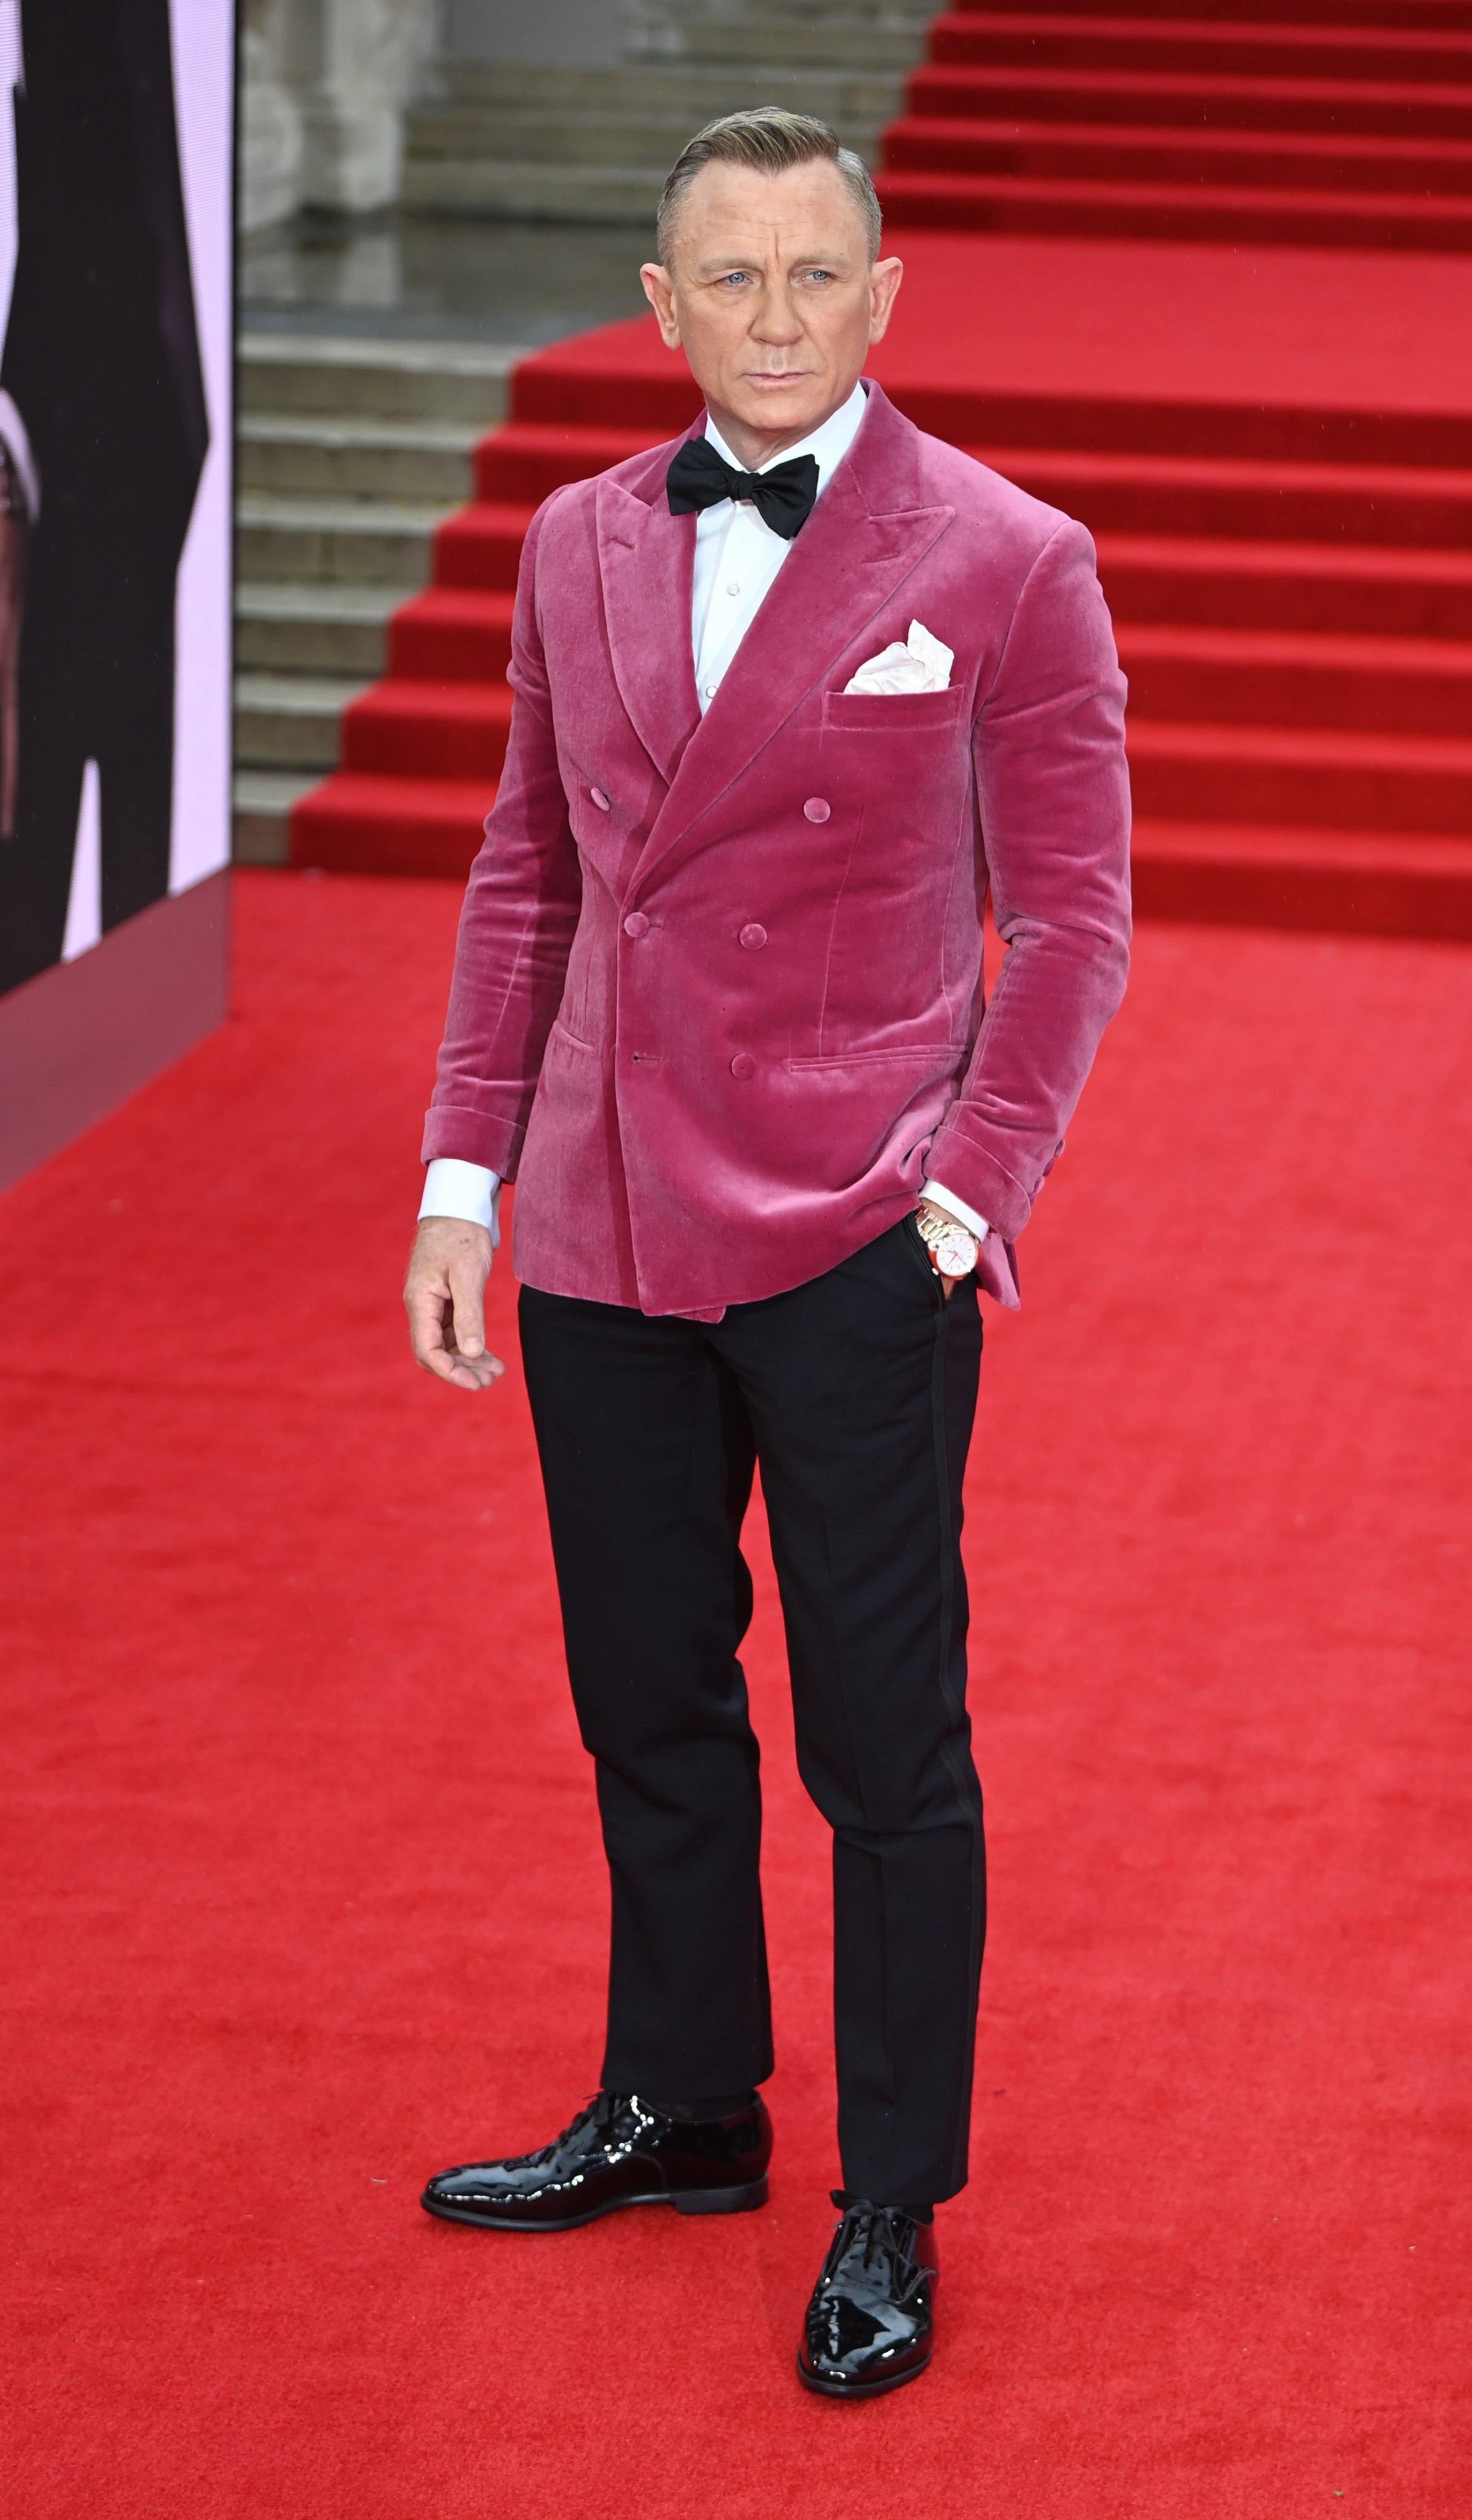 korrekt ordningen Mundtlig Daniel Craig's No Time to Die red carpet fashion – for his last James Bond  film premiere tour, the star wowed in a pink Savile Row tuxedo jacket and  Omega watch 